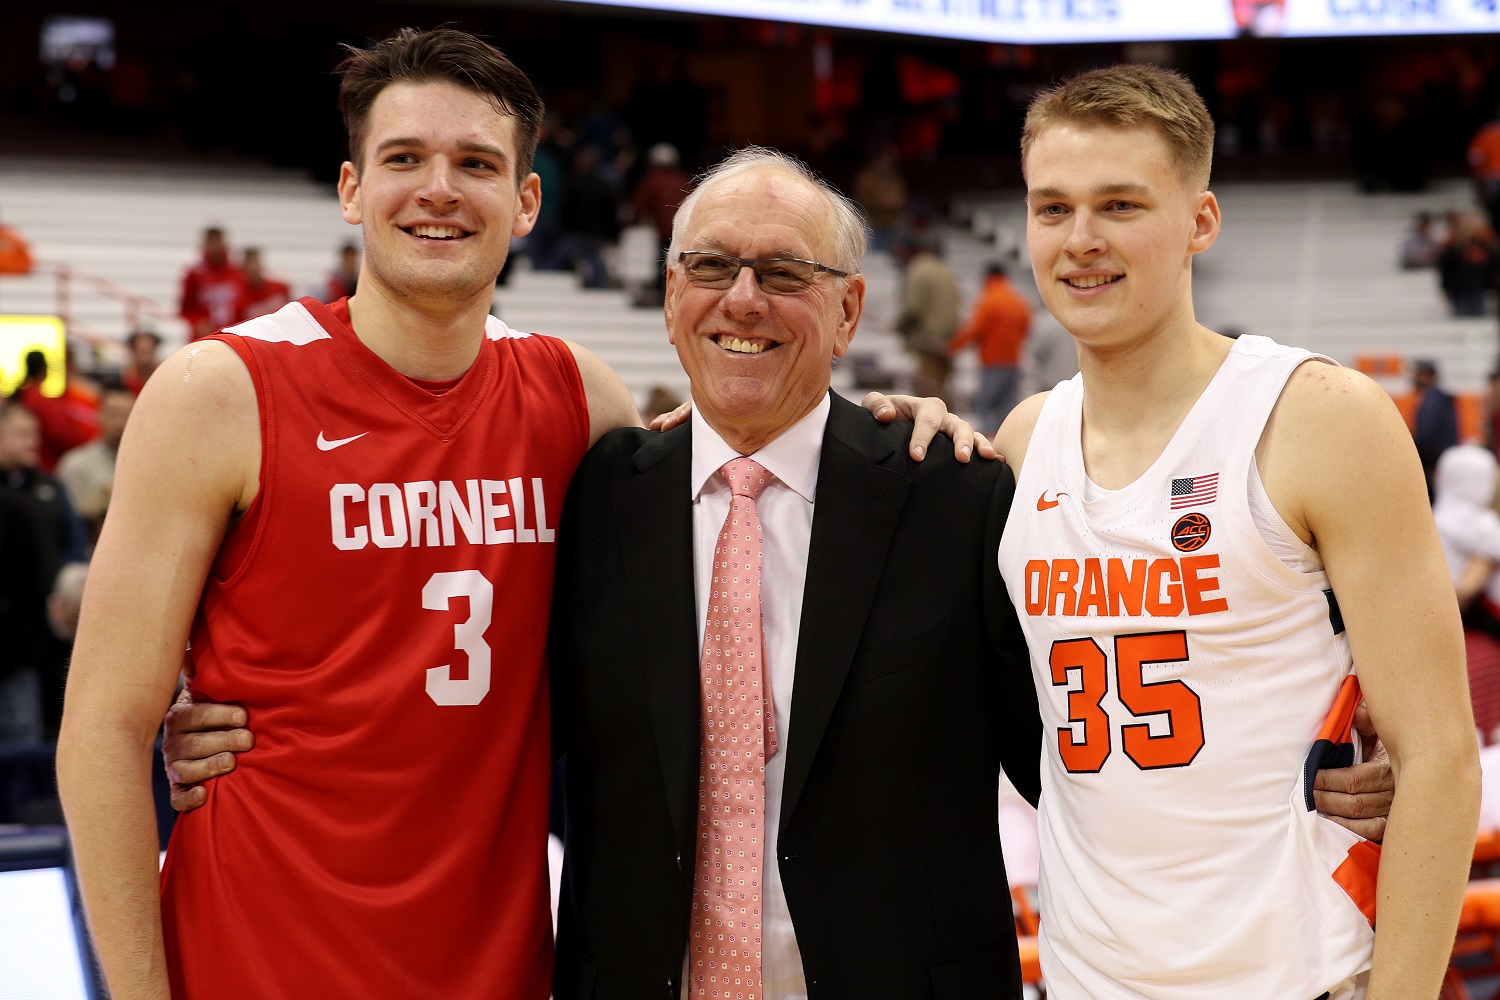 Jimmy, Jim, and Buddy Boeheim will be together in the Syracuse University basketball program next season. Jimmy Boeheim is transferring from Cornell for his final season of eligibility. | Bryan Bennett/Getty Images